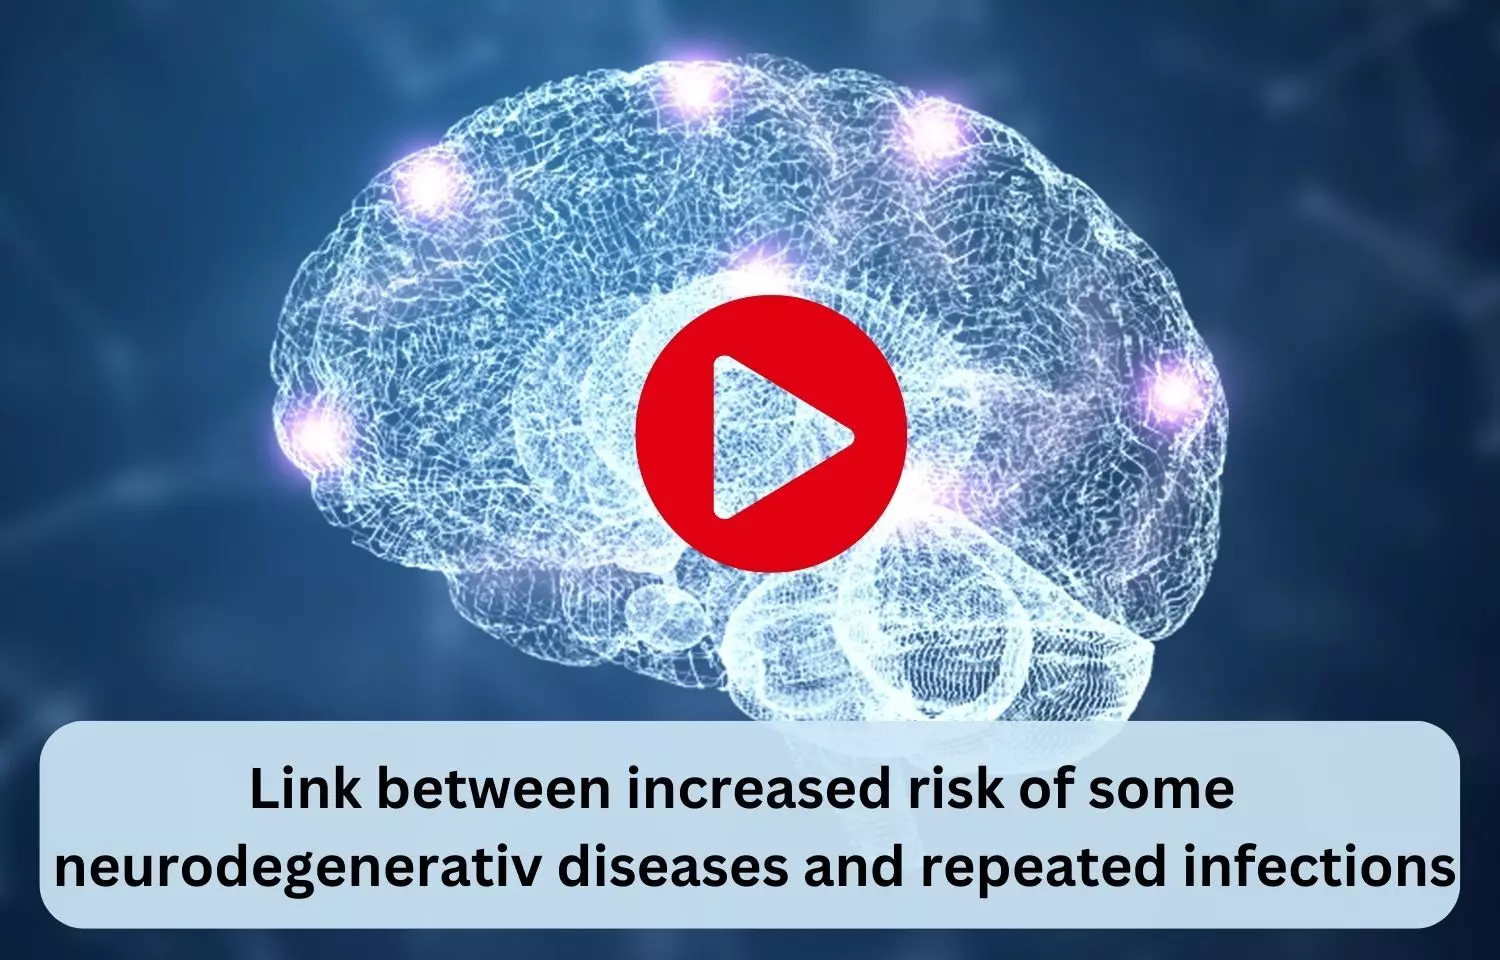 Link between increased risk of some neurodegenerative diseases and repeated infections